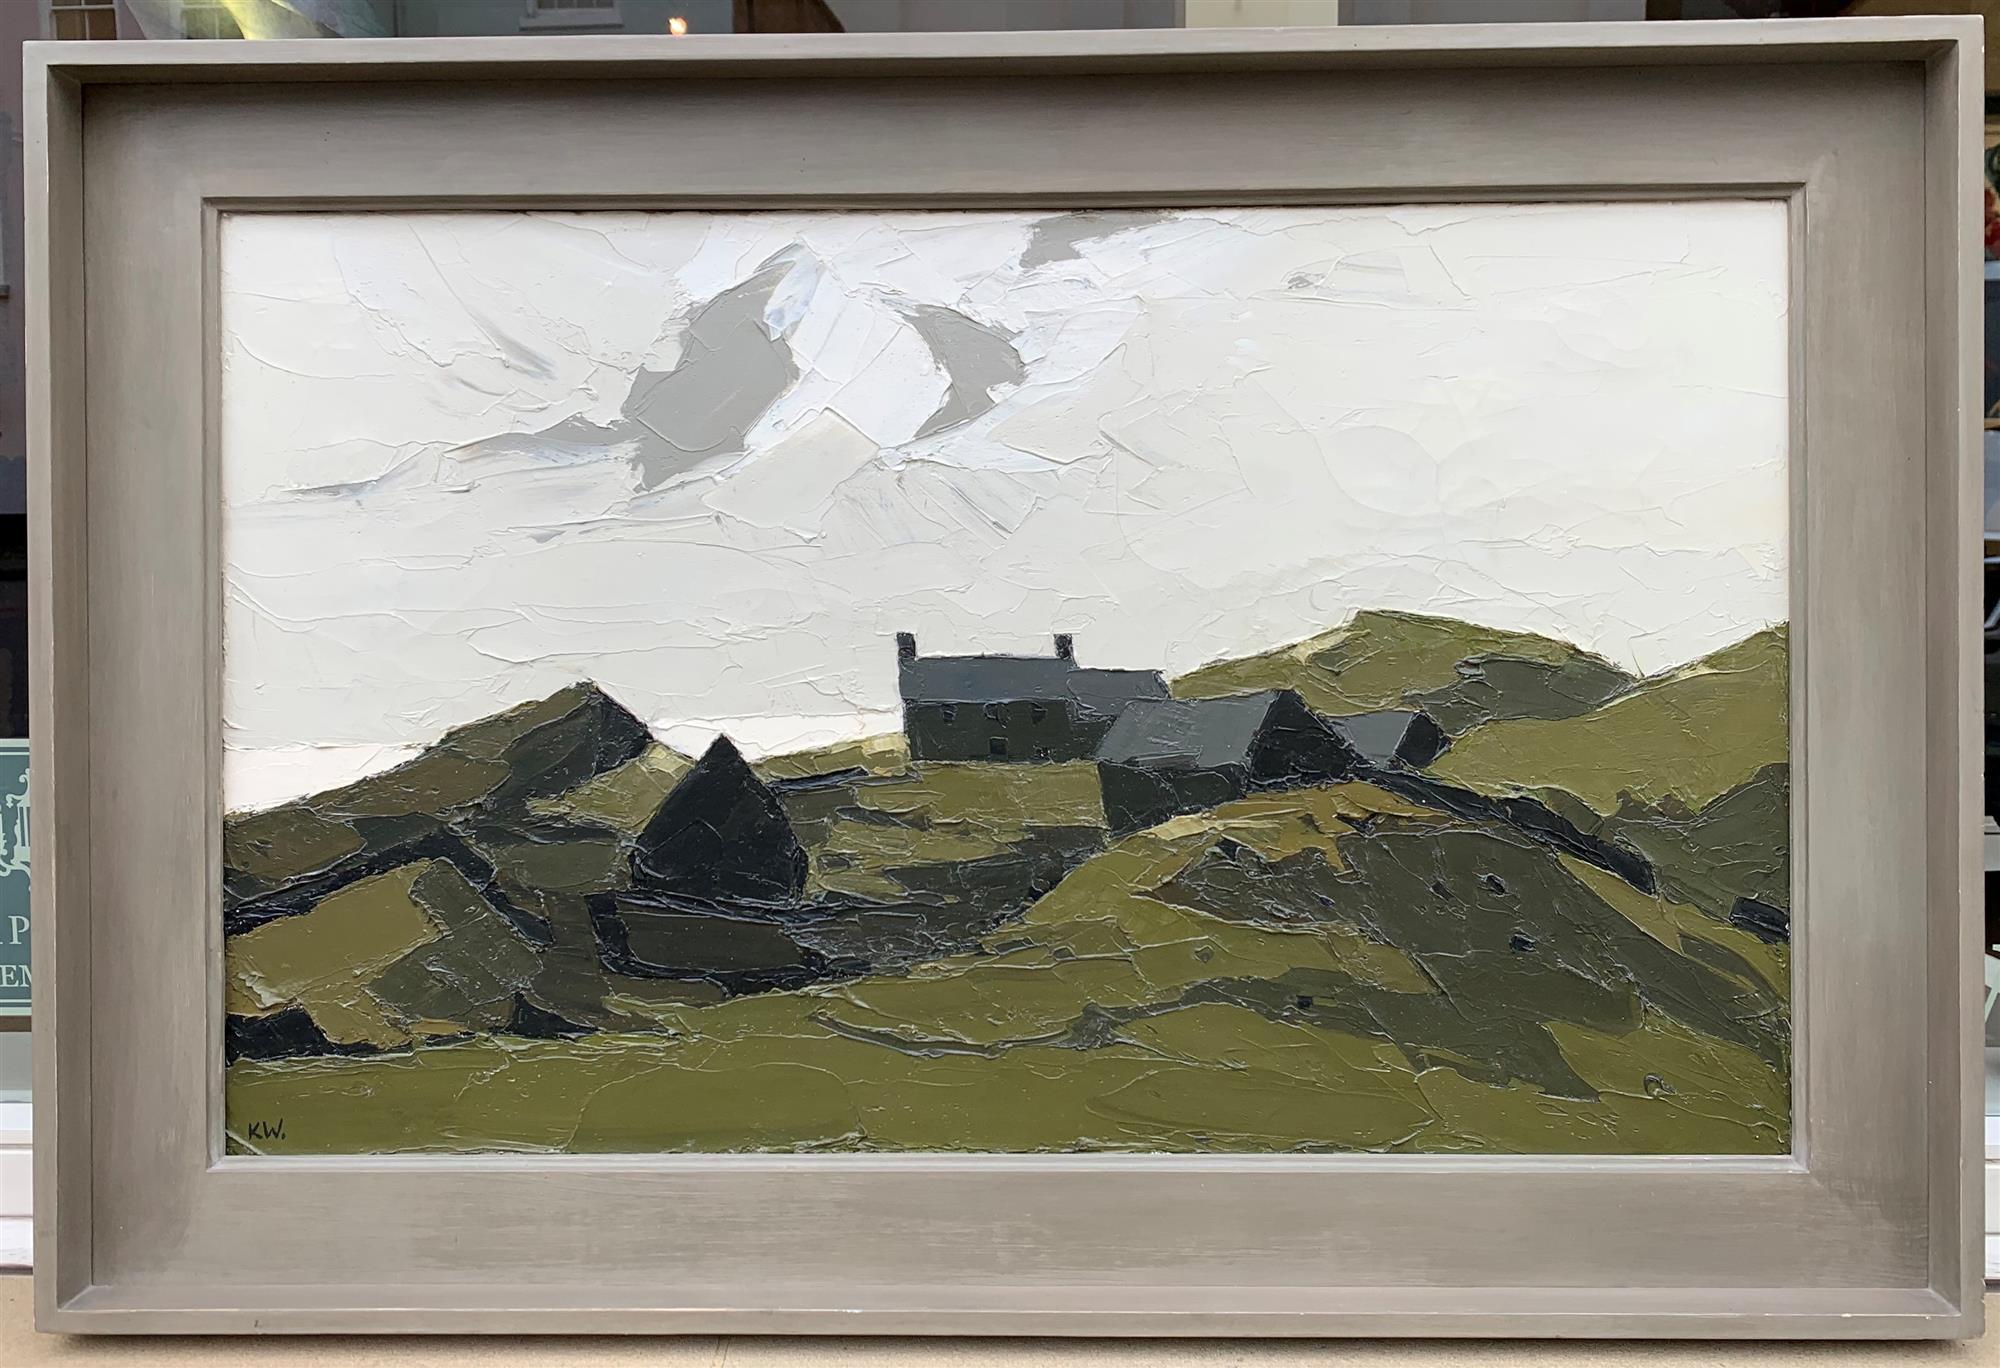 Sir Kyffin Williams (OBE RA) was born in 1918 in Llangefni, Anglesey, Wales. He studied at the Slade School of Fine Art, London from 1941 to 1944. He went on to become the Senior Art Master at Highgate School from 1944 to 1973, and in 1968 gained a